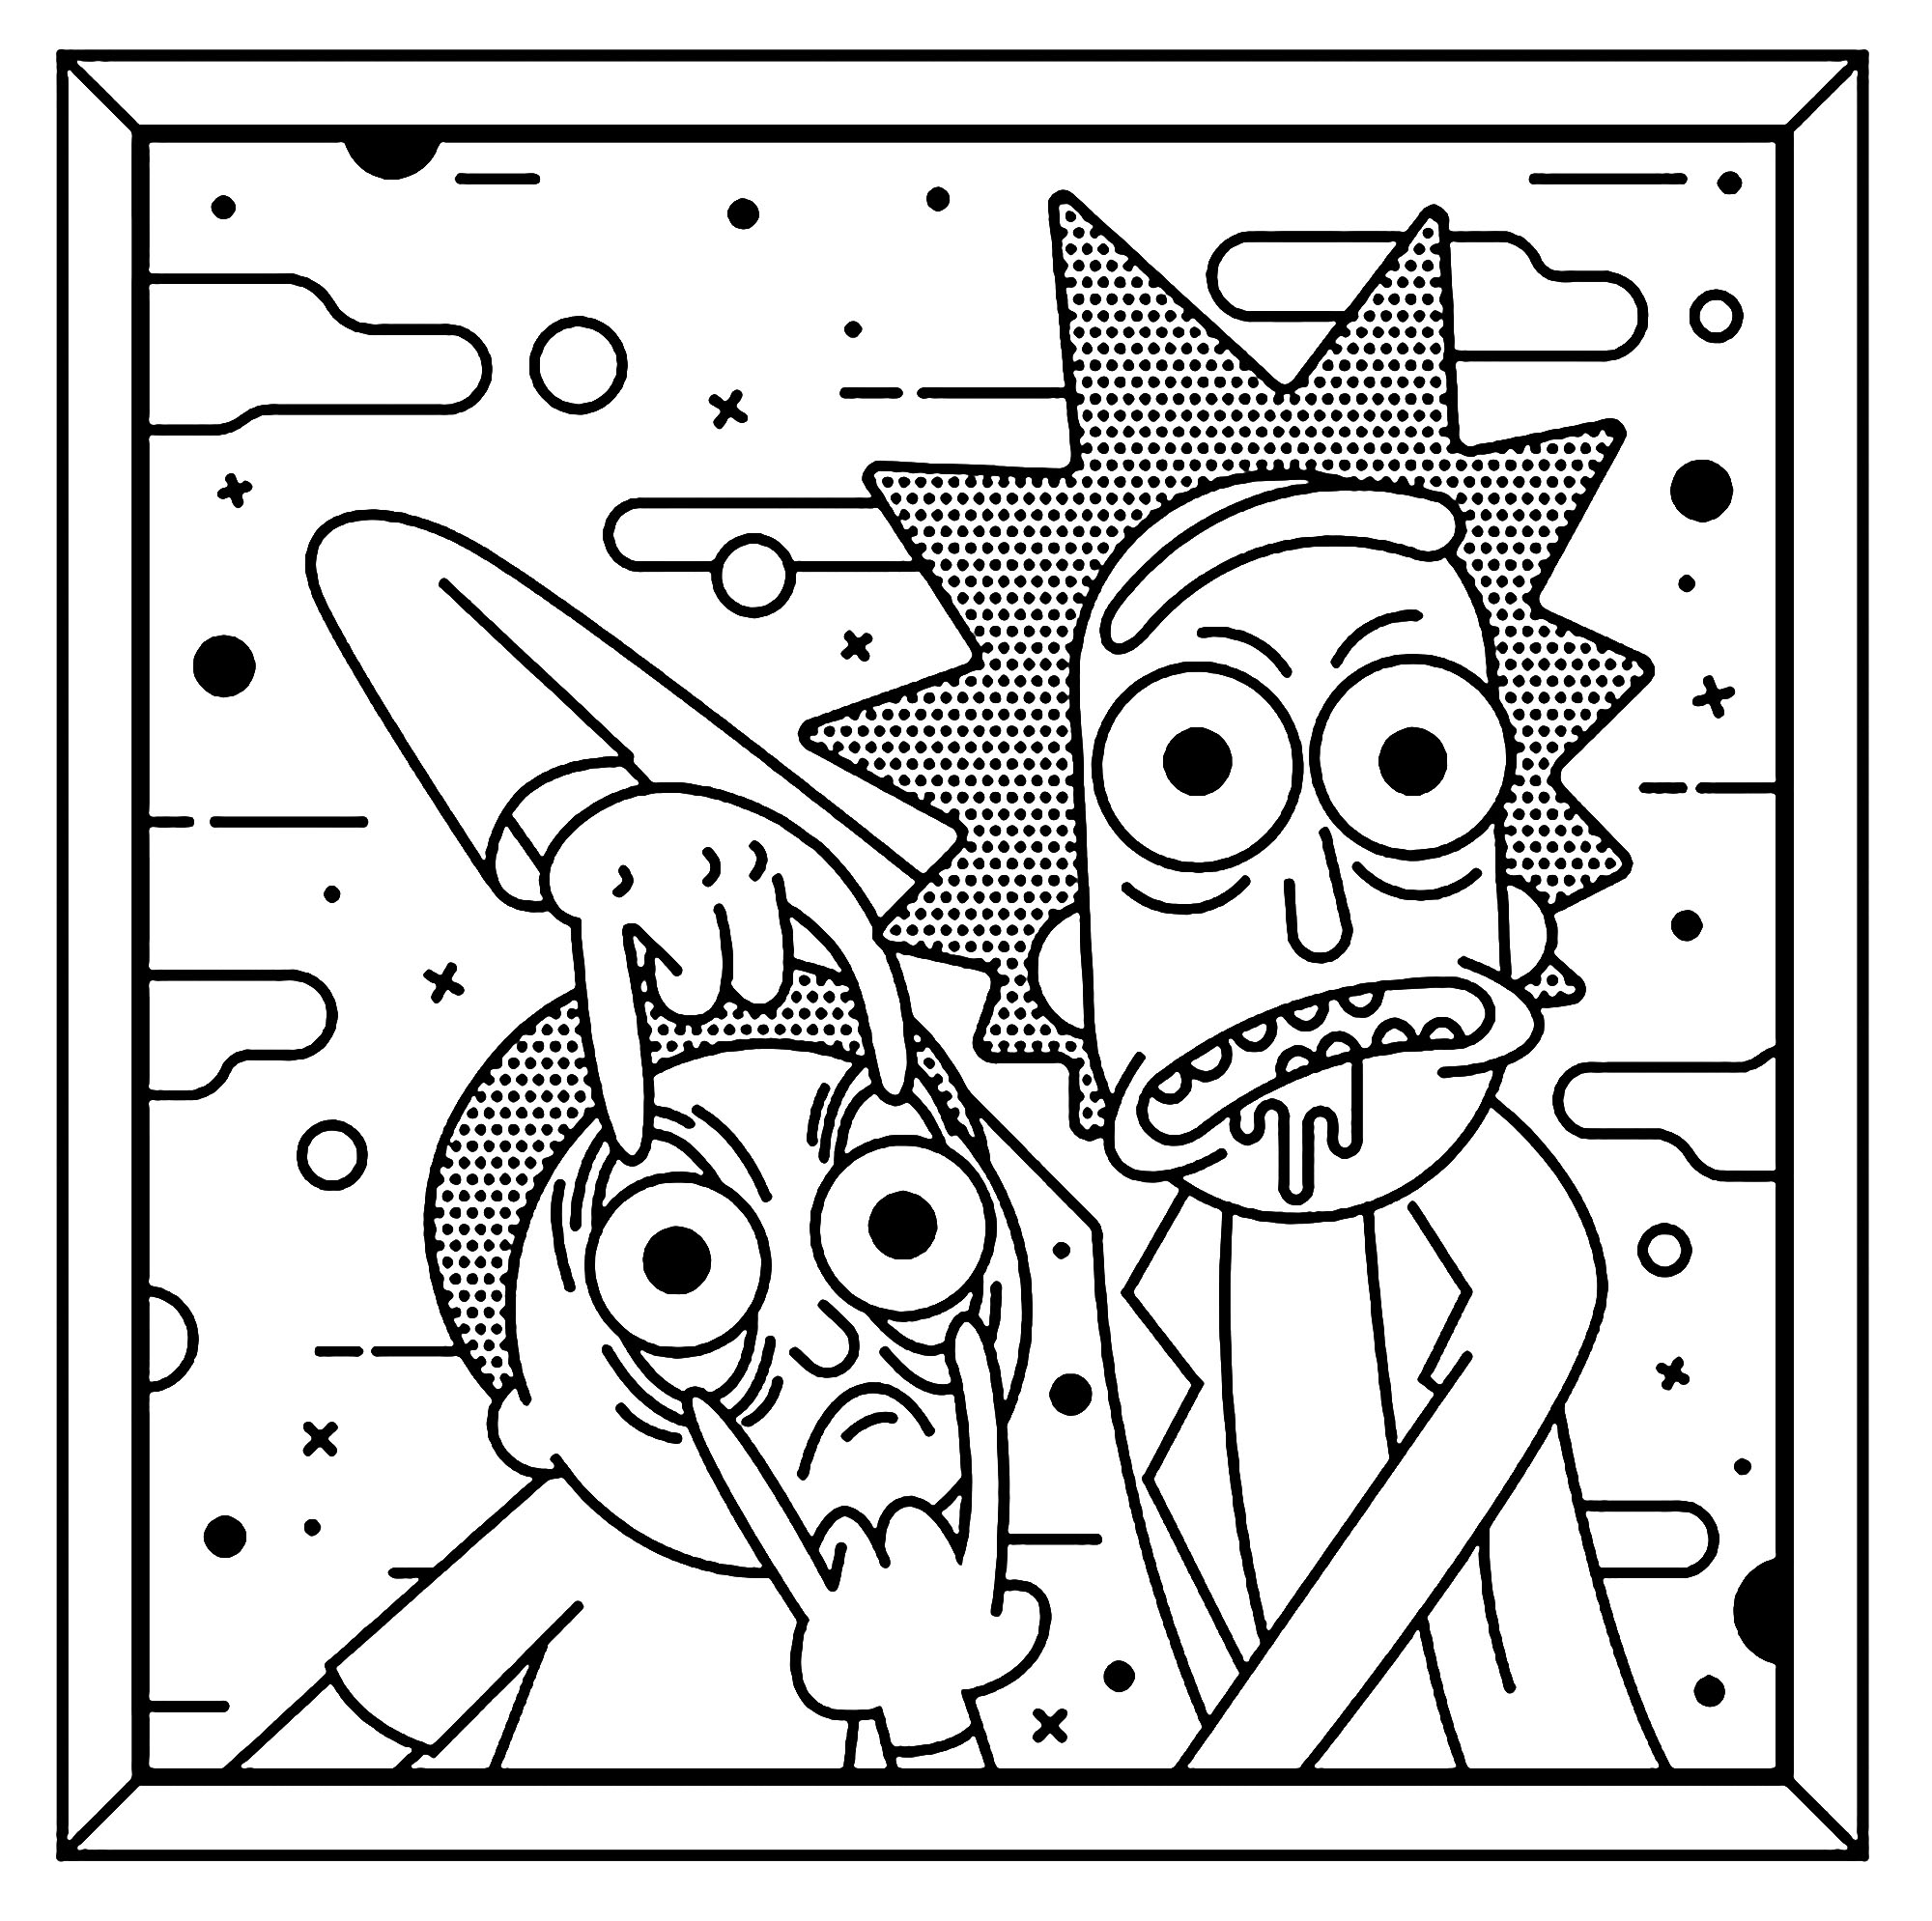 Do you like Pop Art?The two main characters, Rick and Morty, are portrayed in a very characteristic Roy Lichtenstein style.